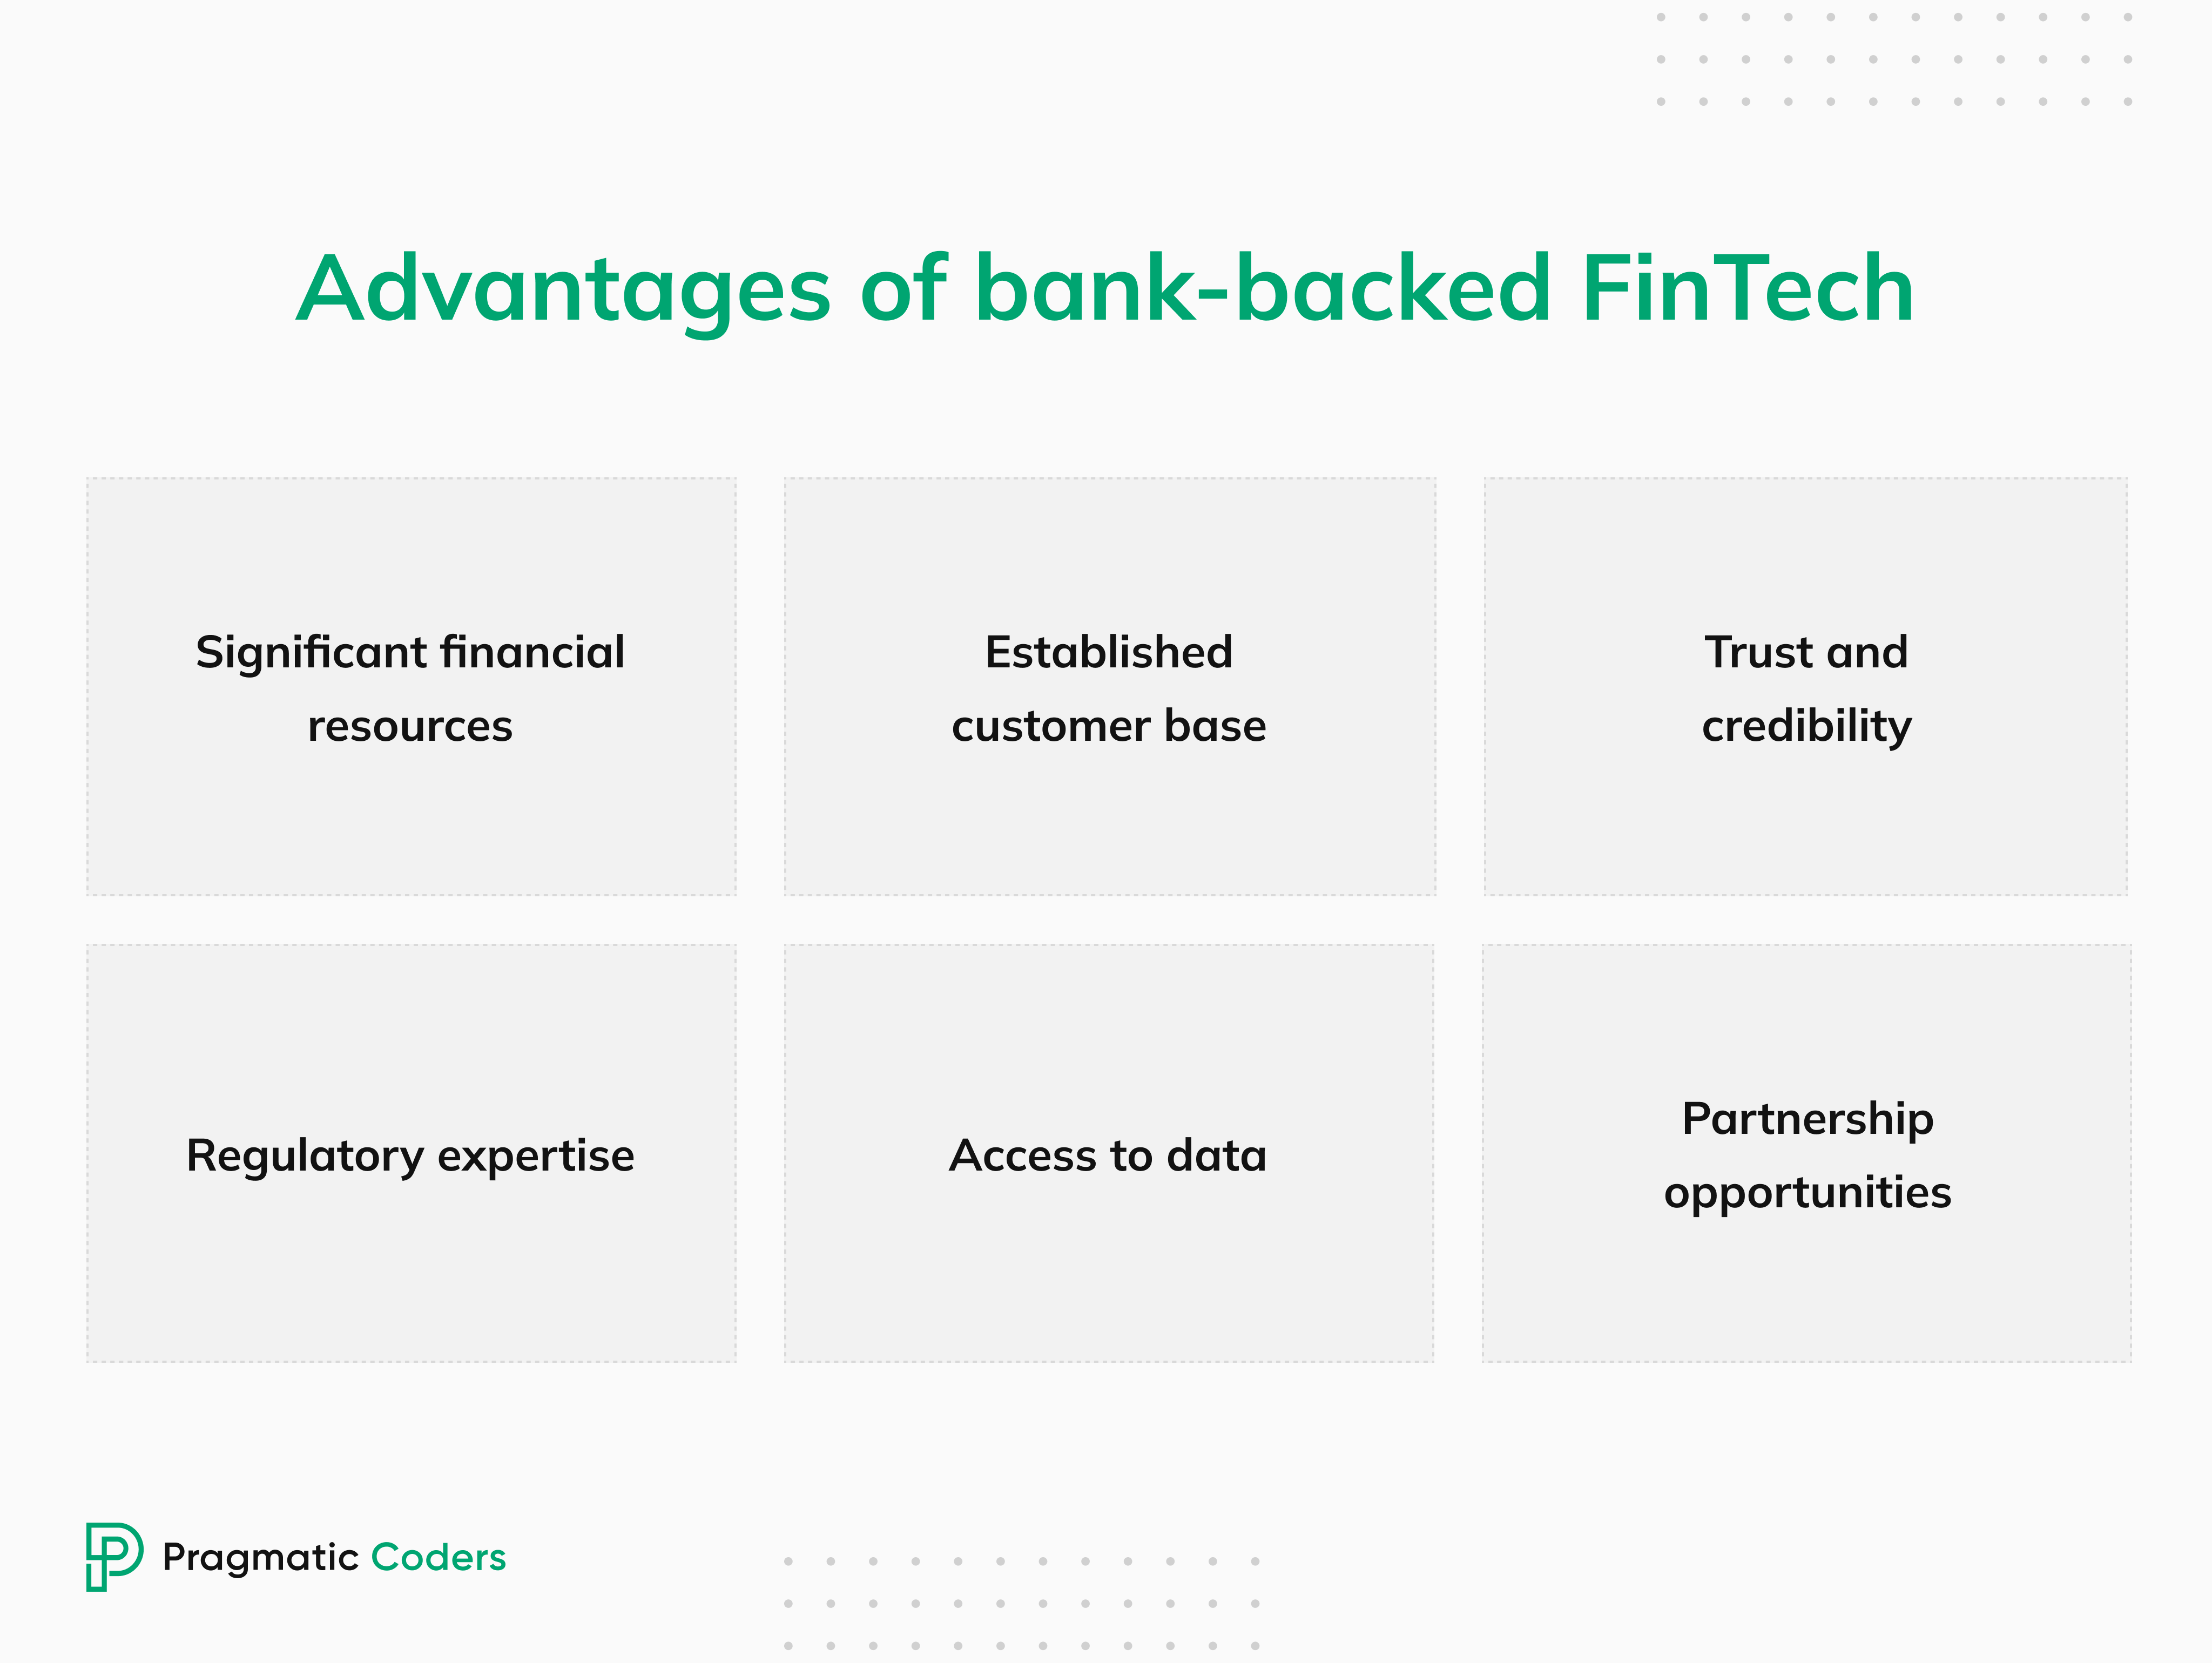 Advantages of bank-backed FinTech